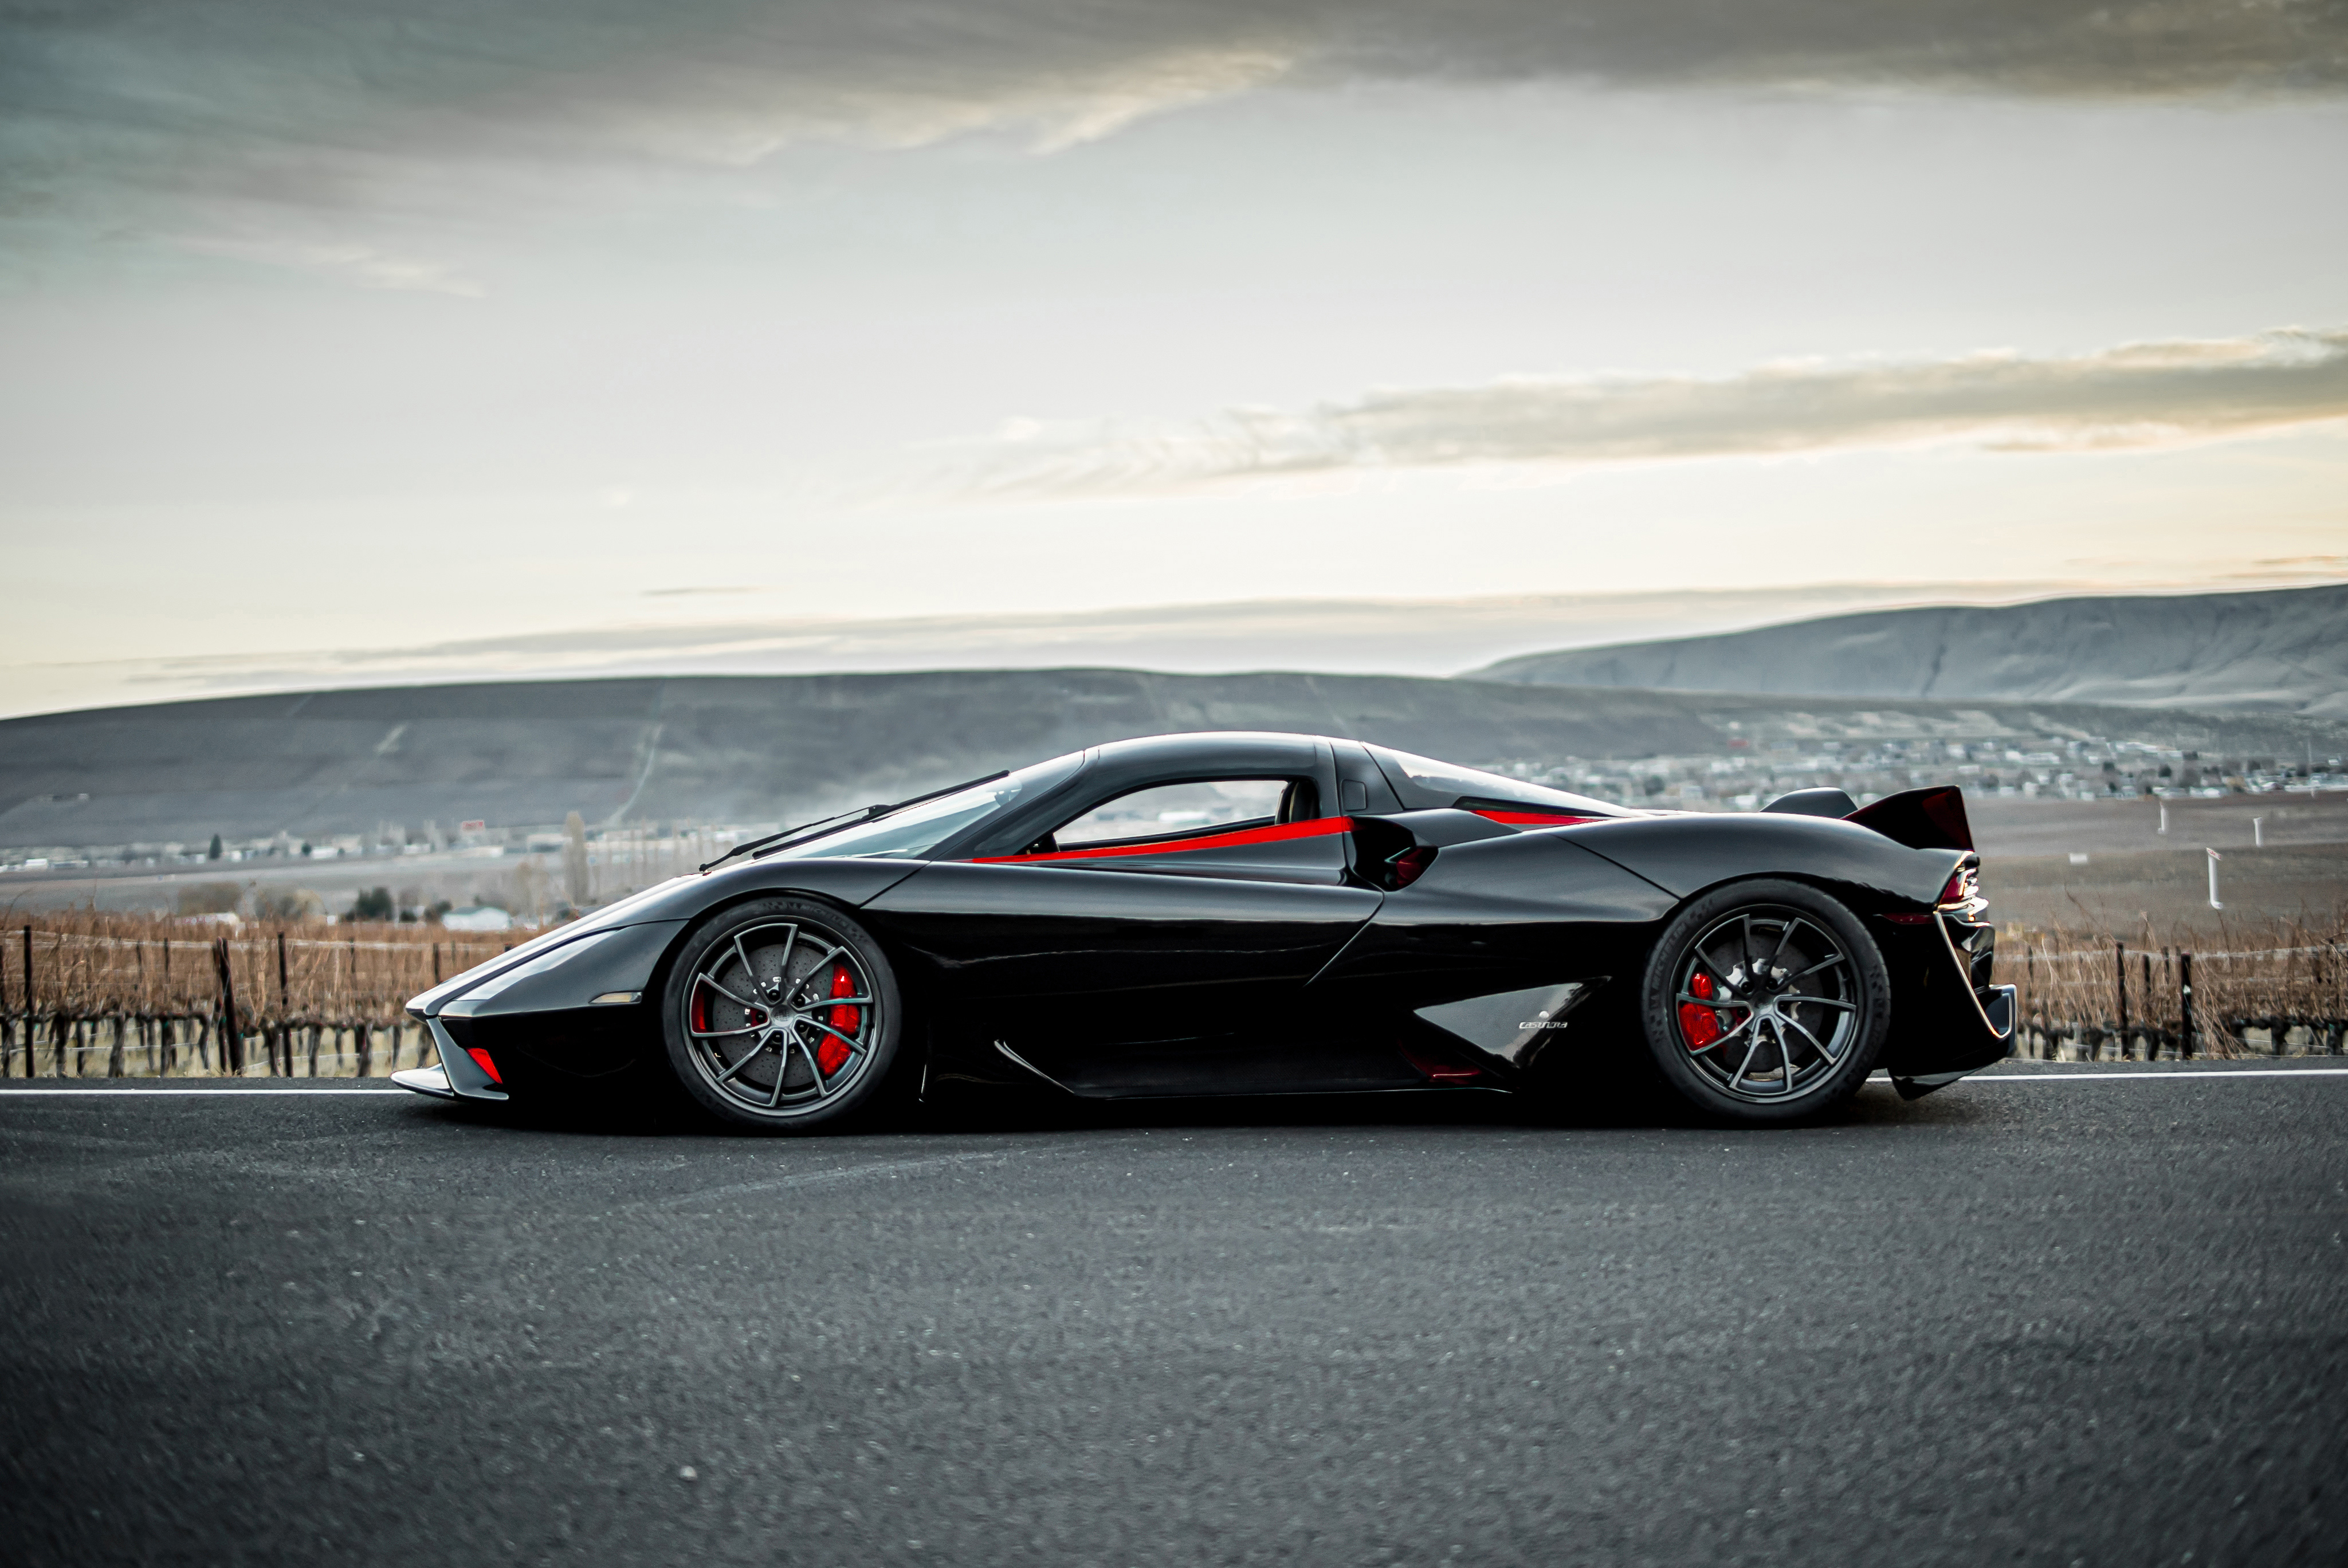 Black ssc tuatara with red inserts side view